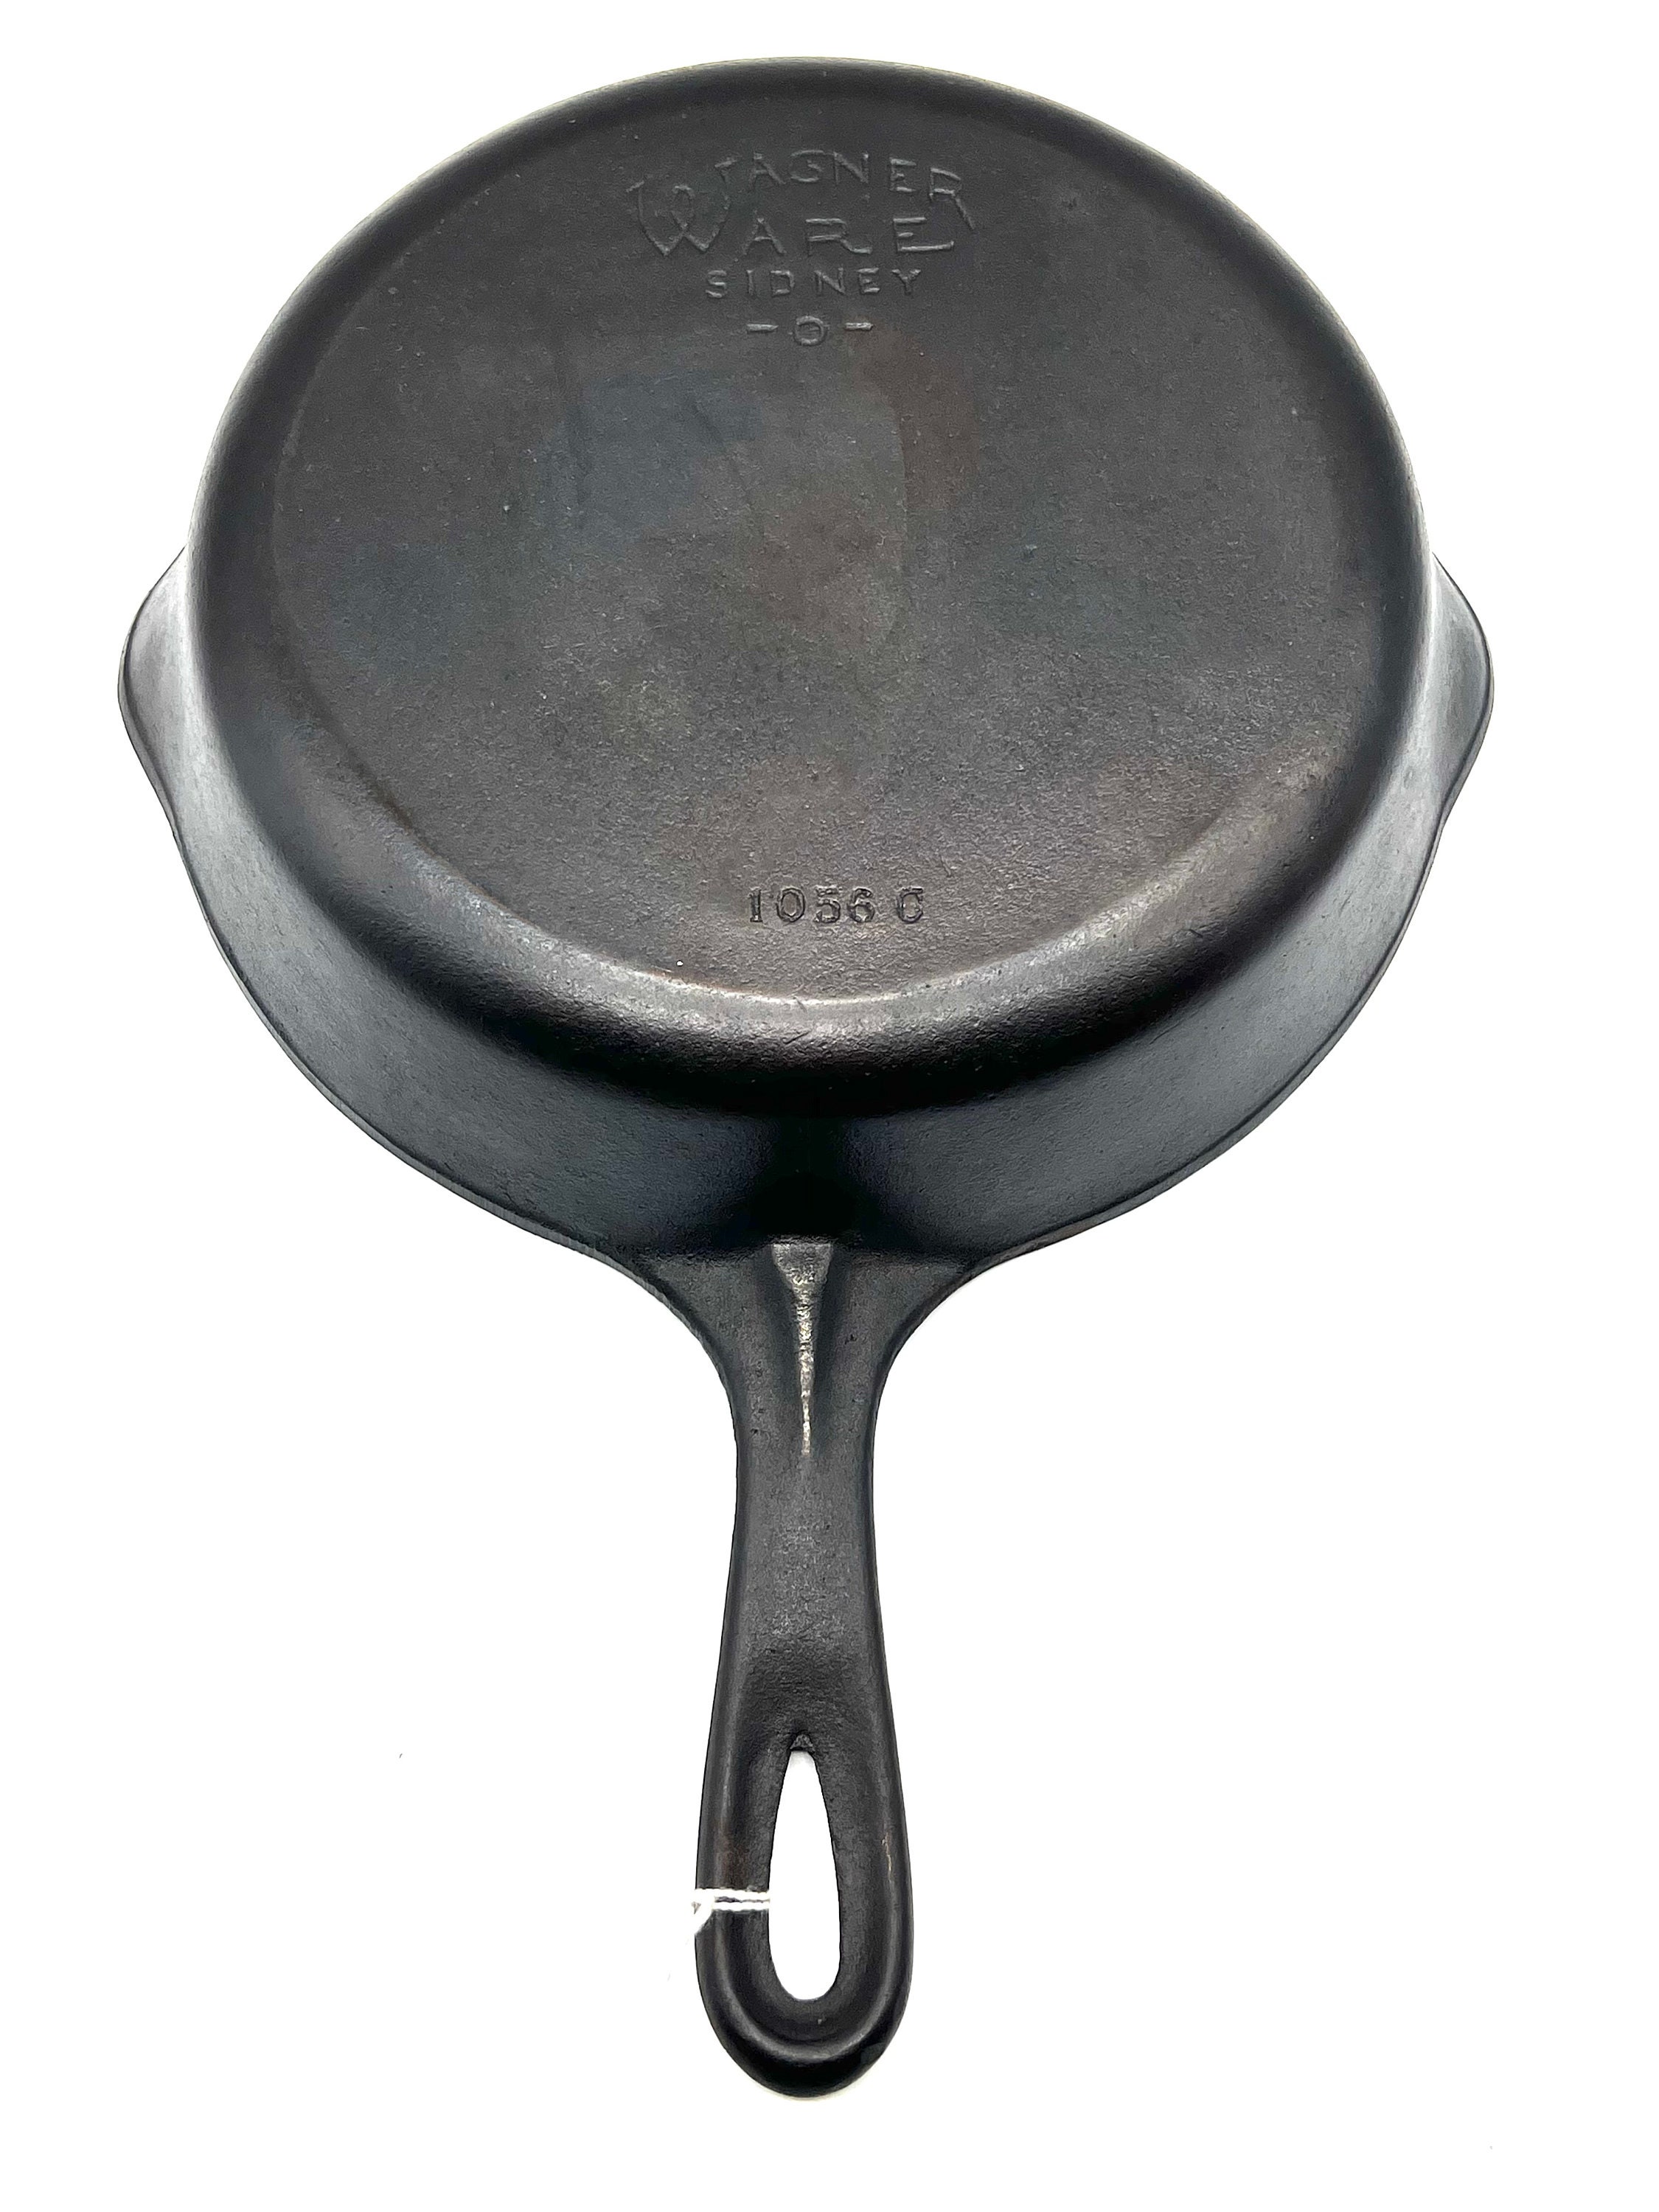 Rena Ware West Bend 11 Electric Skillet Stainless Liquid Core Saute Fry  Pan Lid